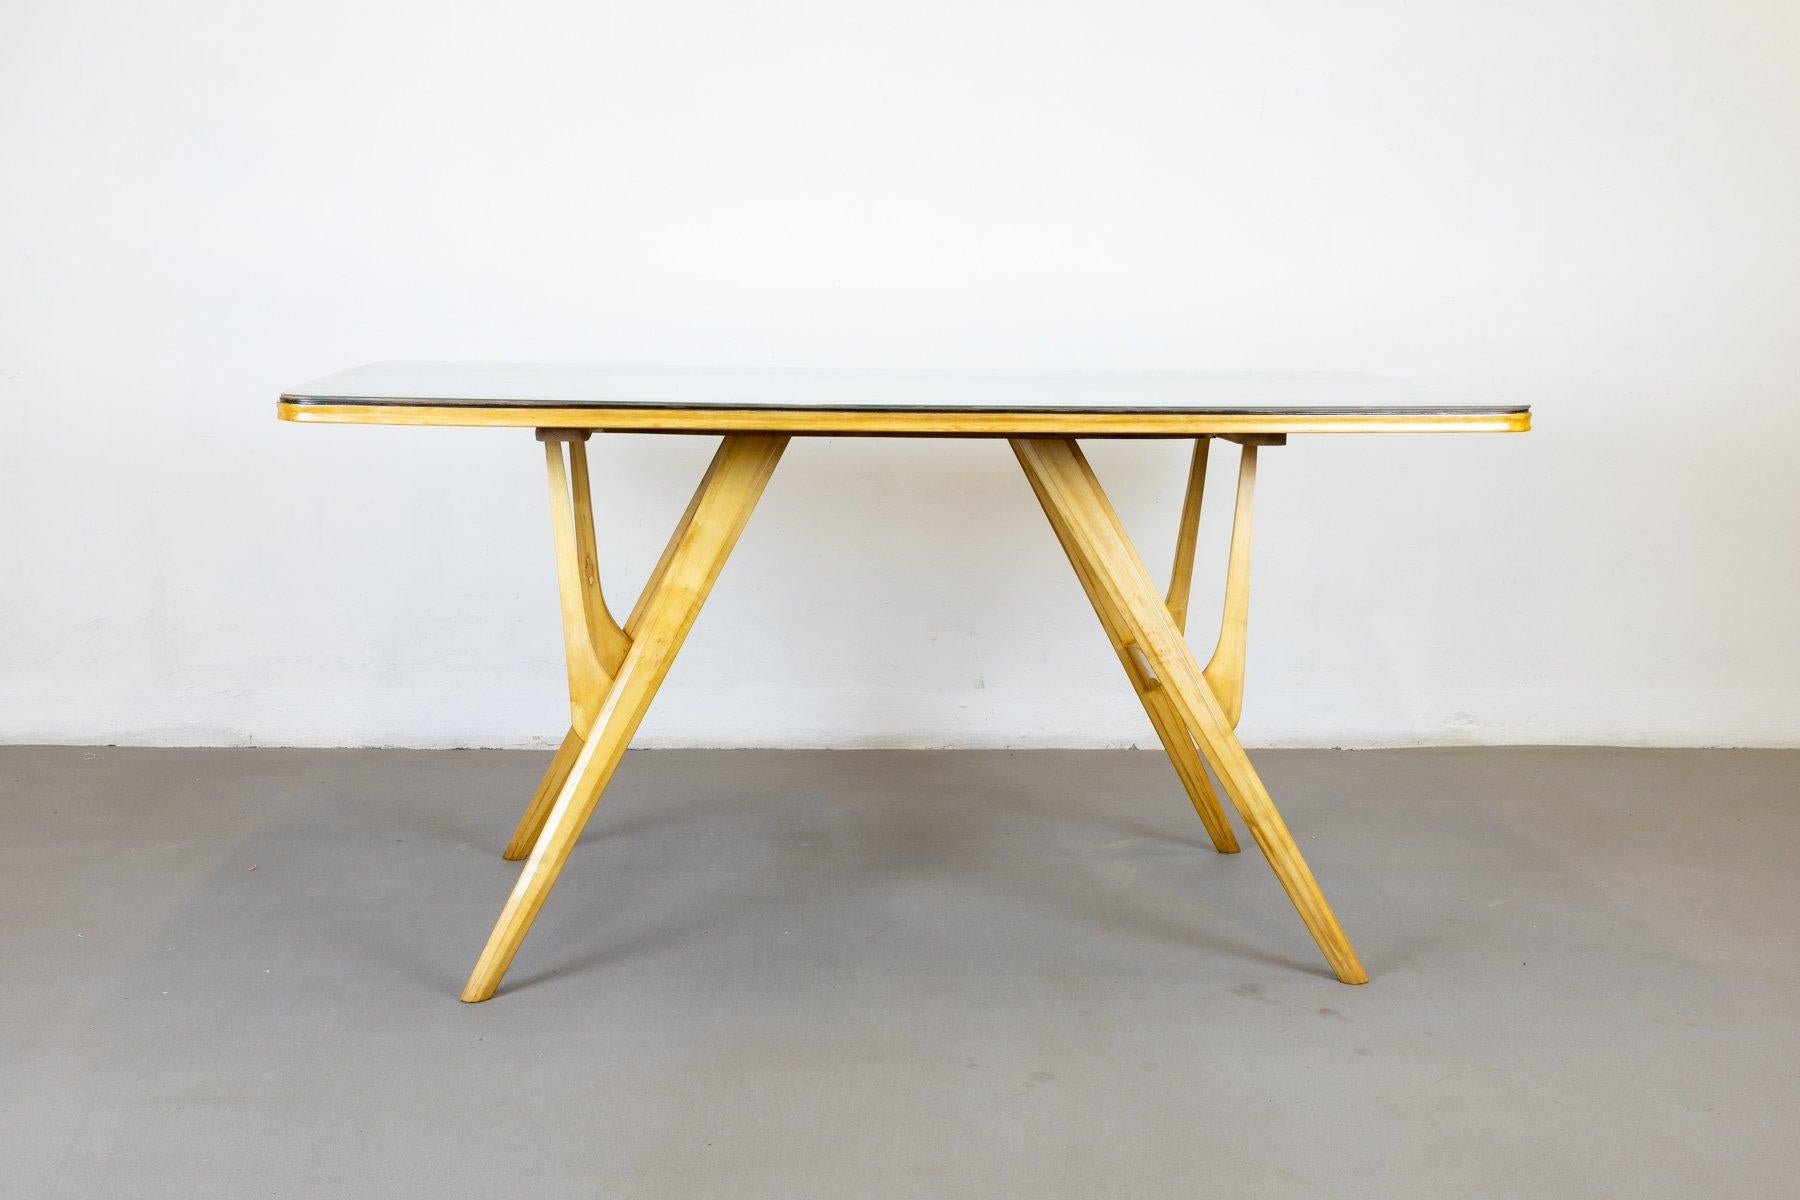 Anthropomorphic wooden table by Franco Campo and Carlo Graffi 1950s For Sale 1